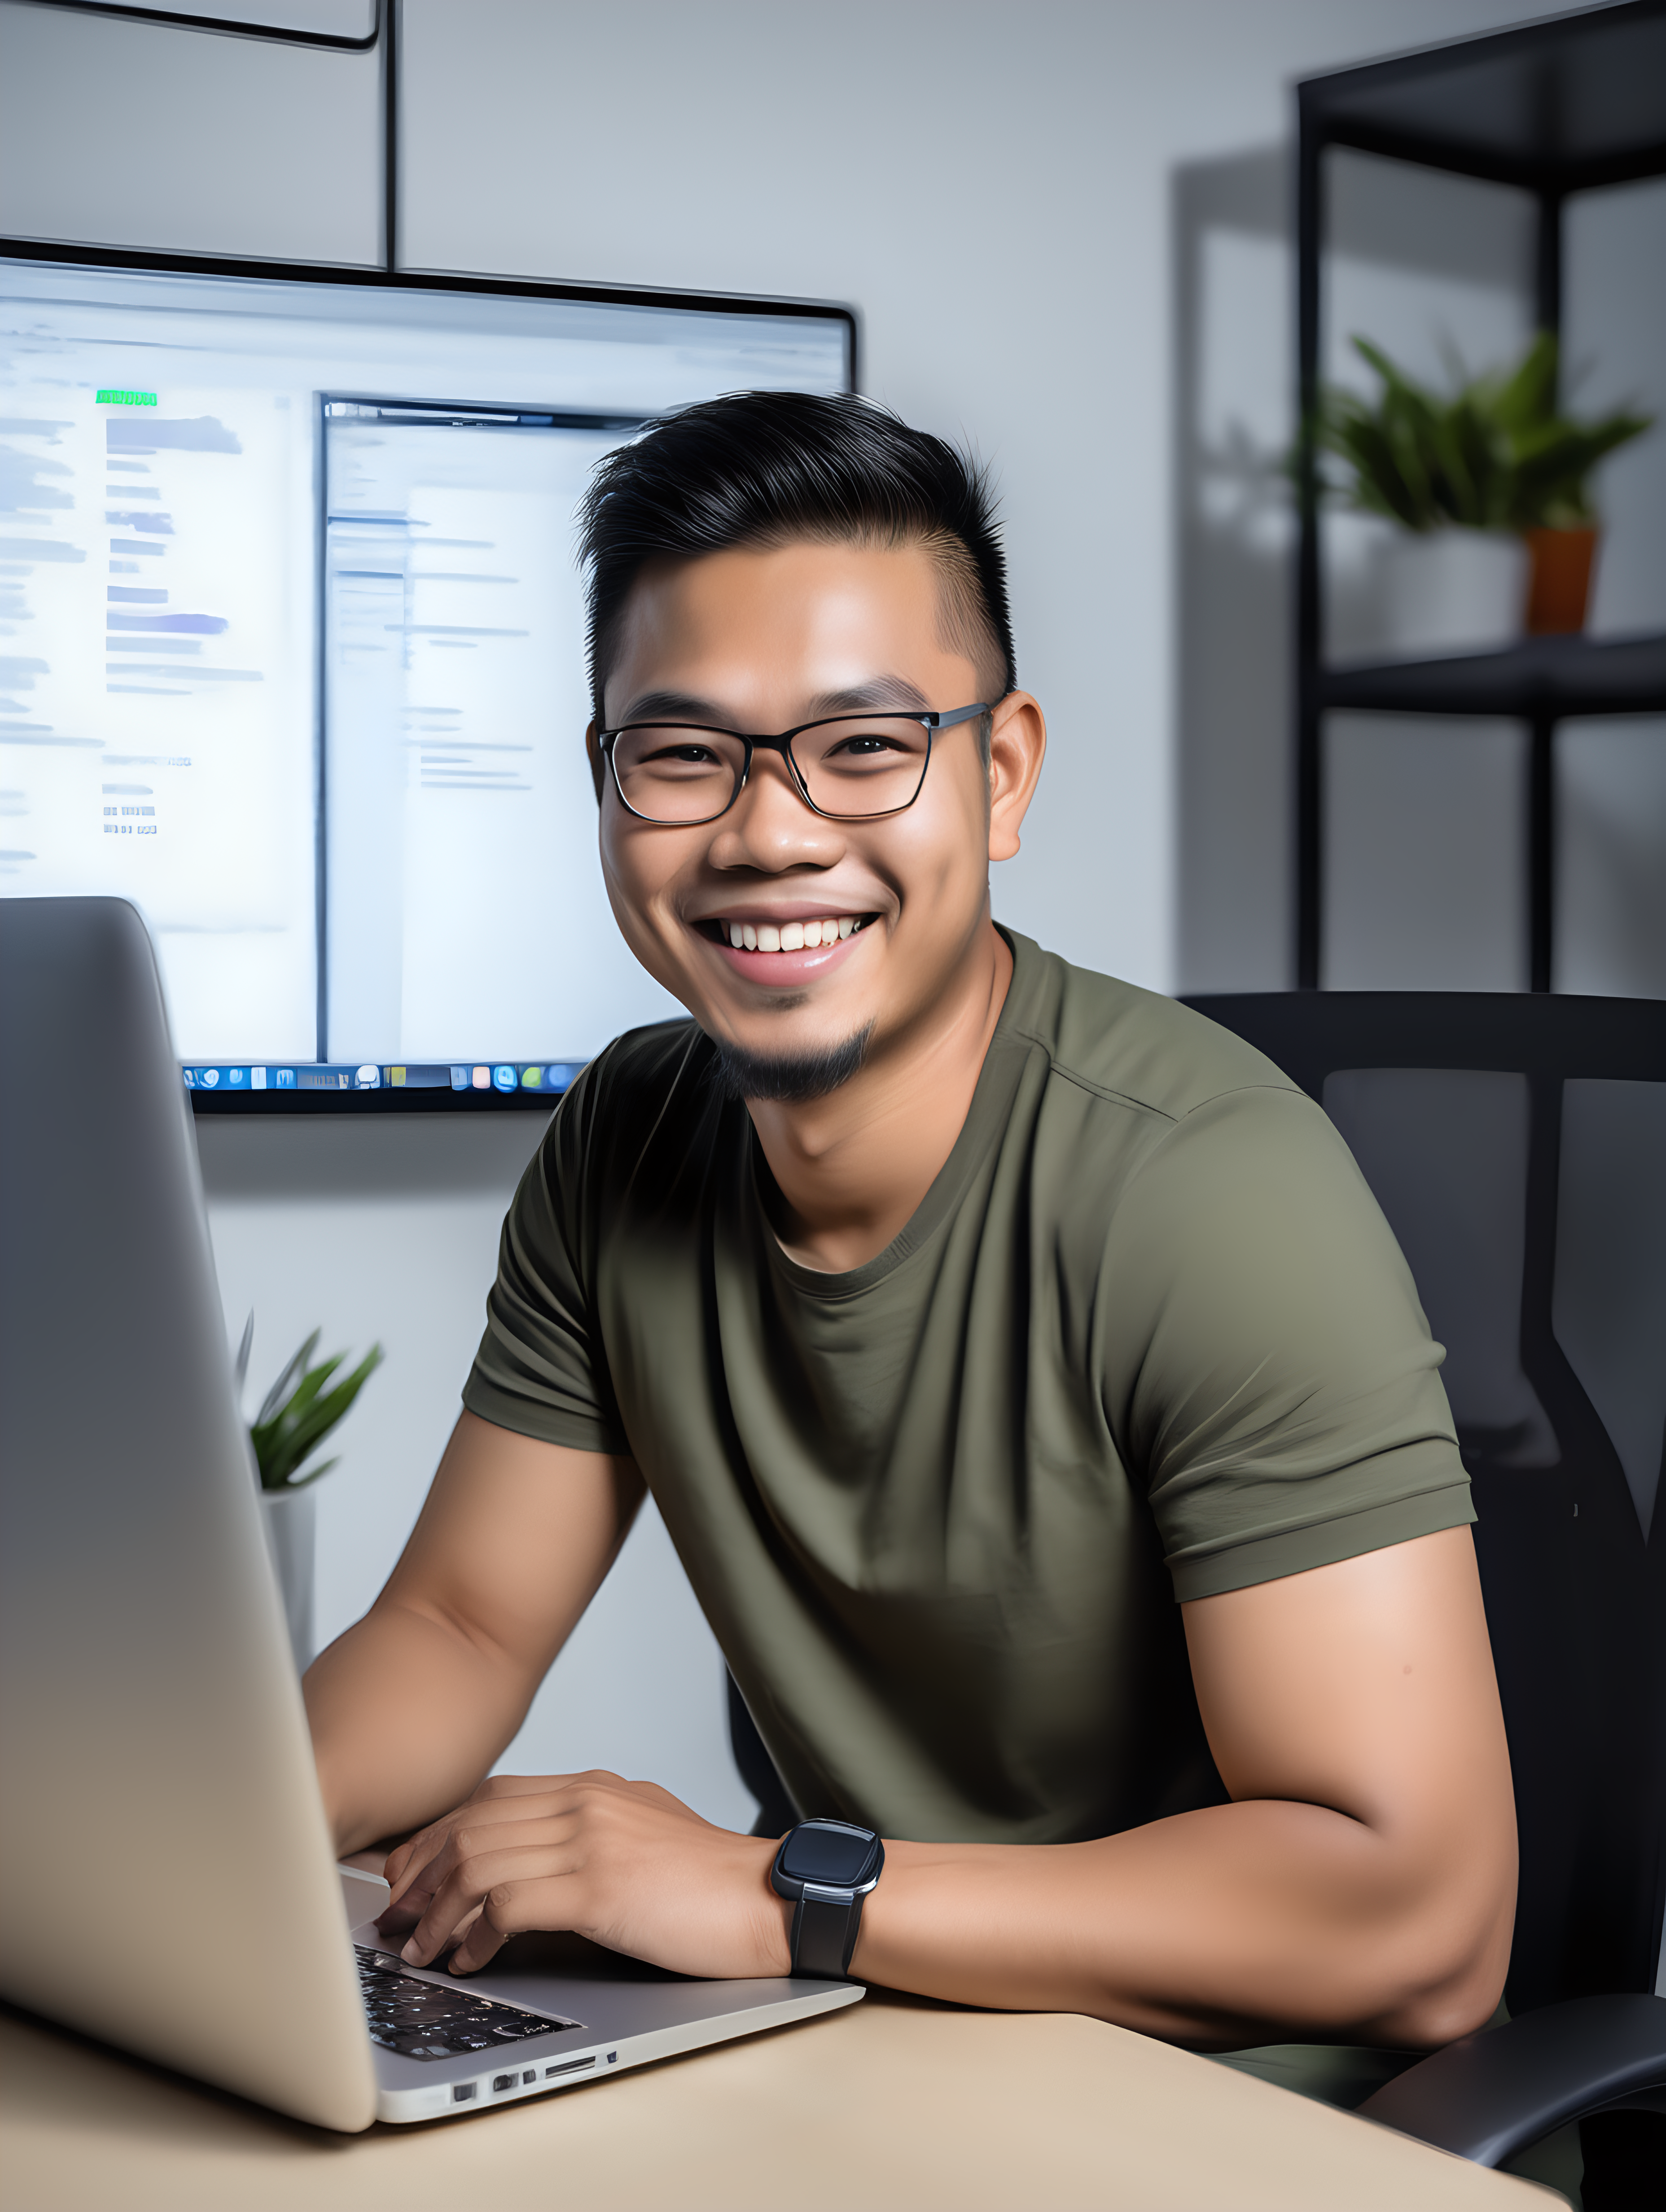 Good looking filipino Software developer sitting at his desk and smiling holding his laptop under the other arm, with software development desk scene in the background
